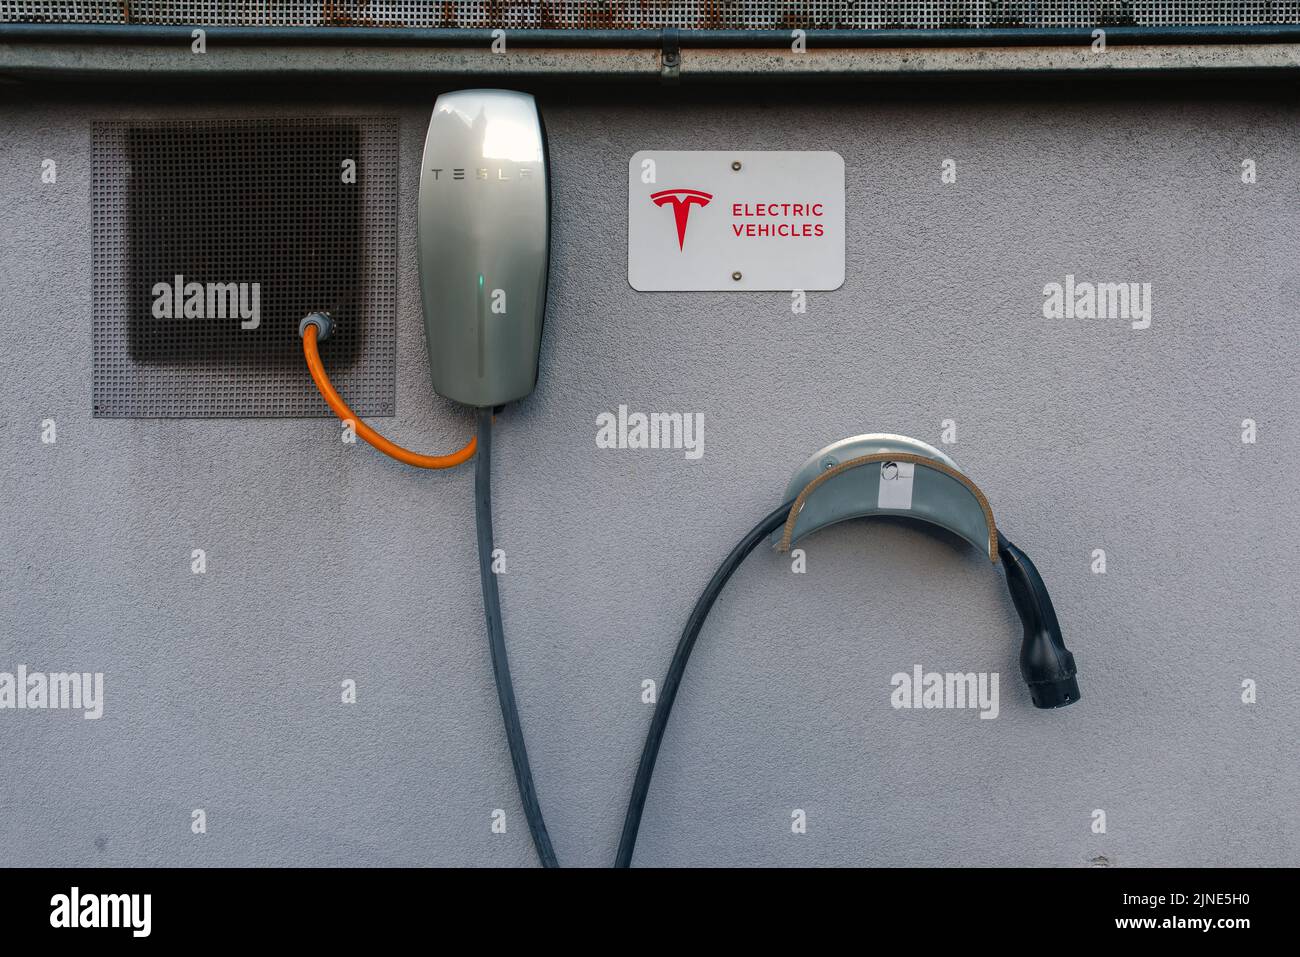 Tesla Wall Connector Charger Installation, Sydney, NSW